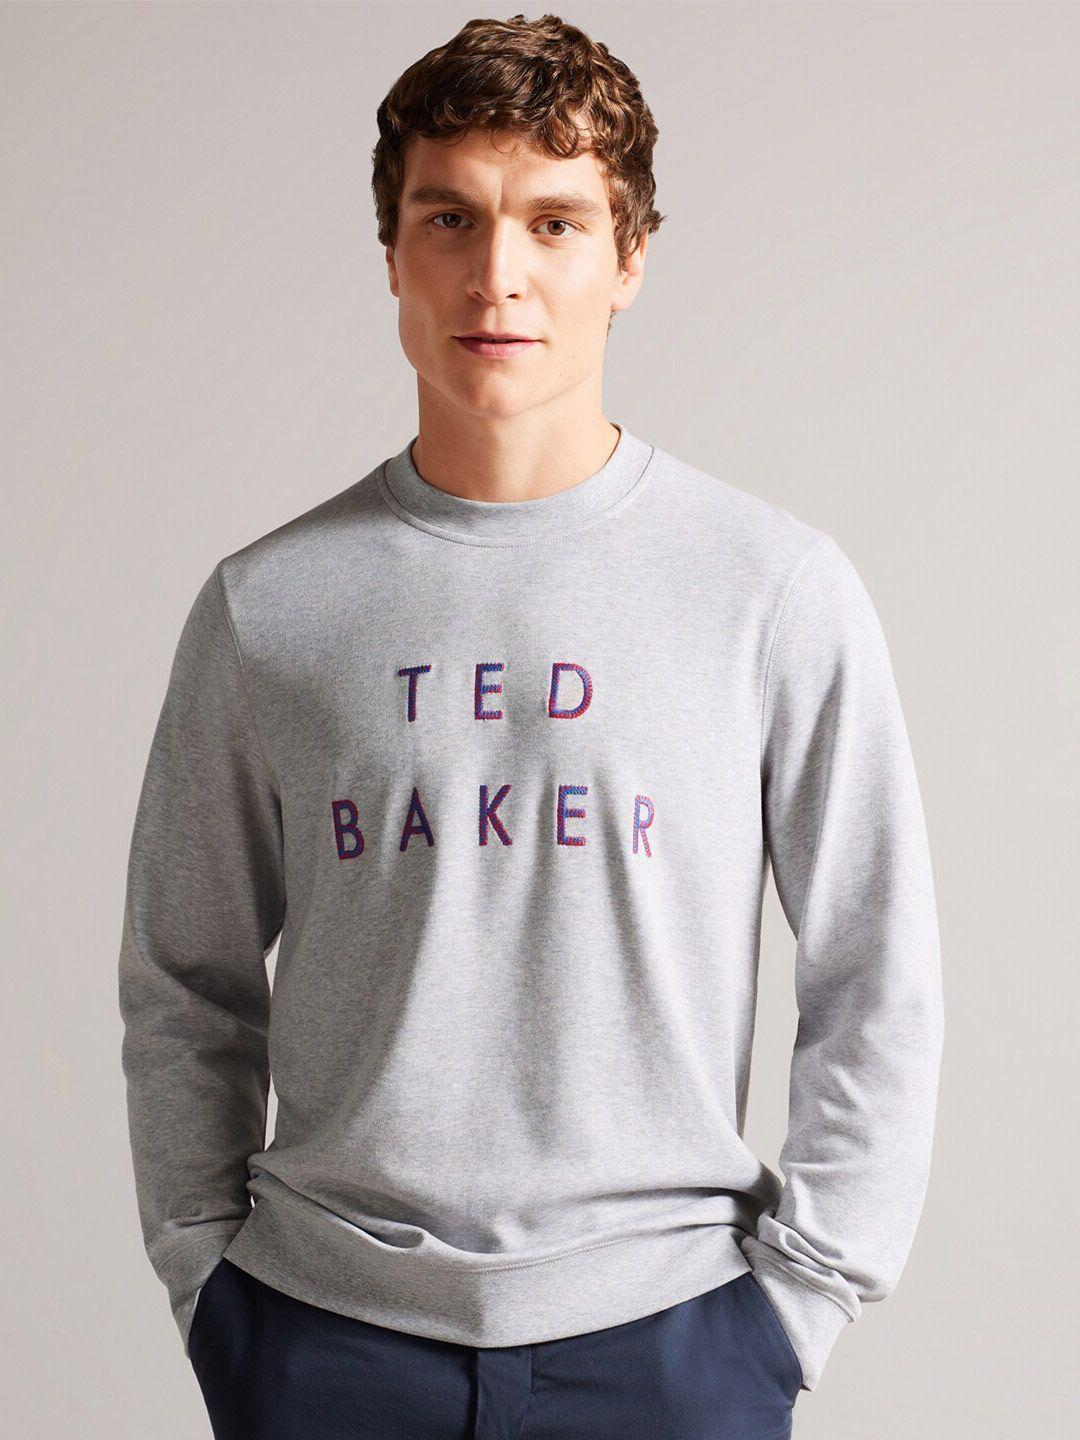 ted-baker-men-cotton-printed-pullover